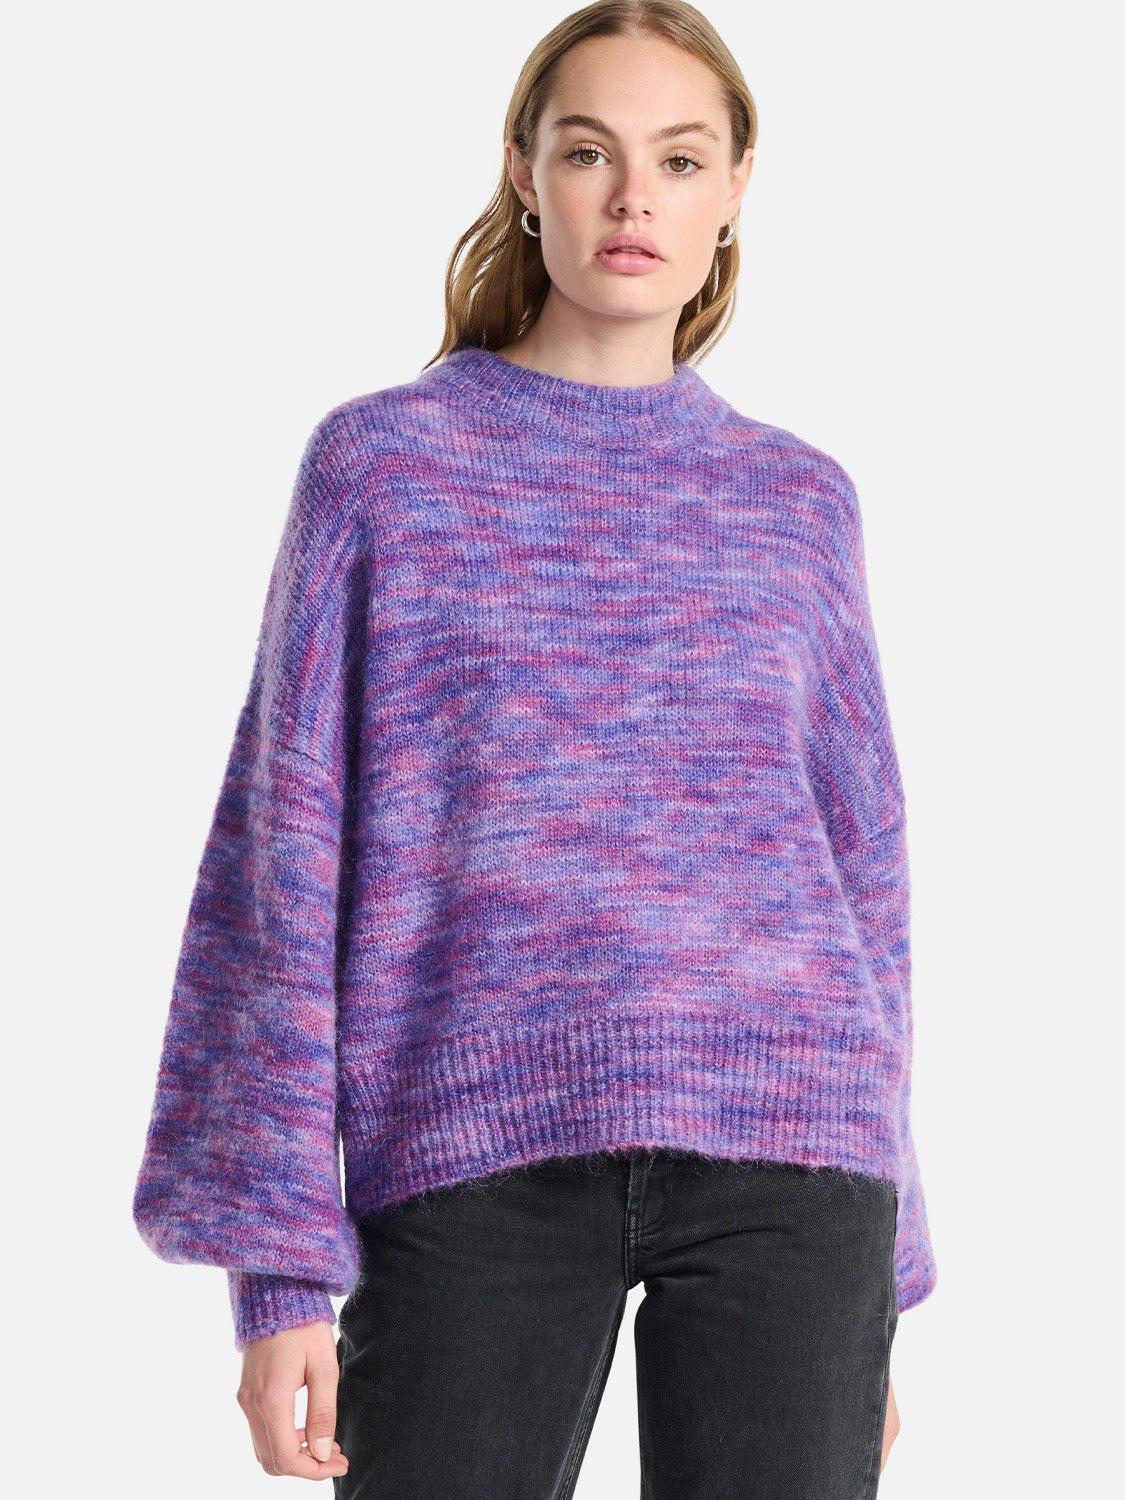 Jessica Knit Top - Meadow Violet Marle